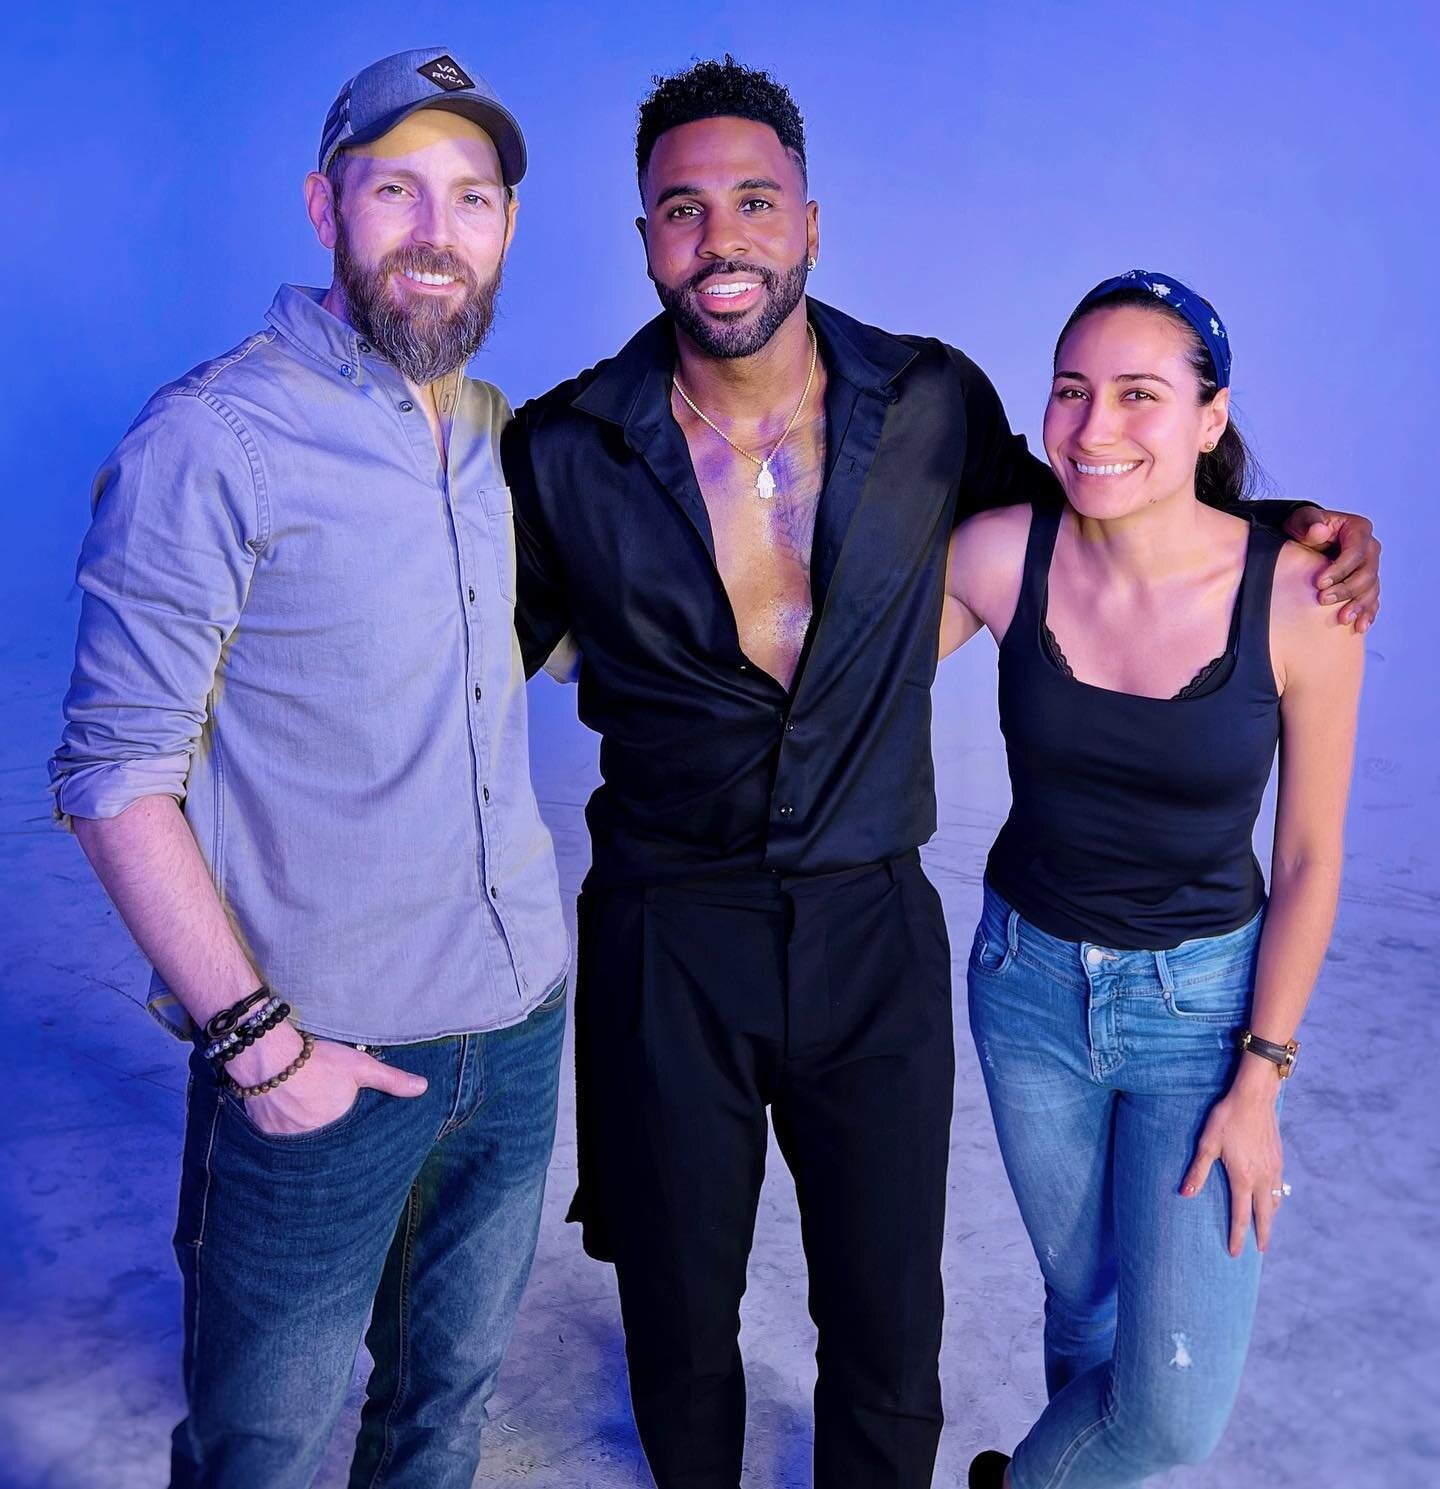 So grateful for our opportunity to work with @jasonderulo to film a performance video out in LA. He and his whole team were so dedicated to every aspect of the project and it was a true honor to work with such an incredible artist. He was nice enough